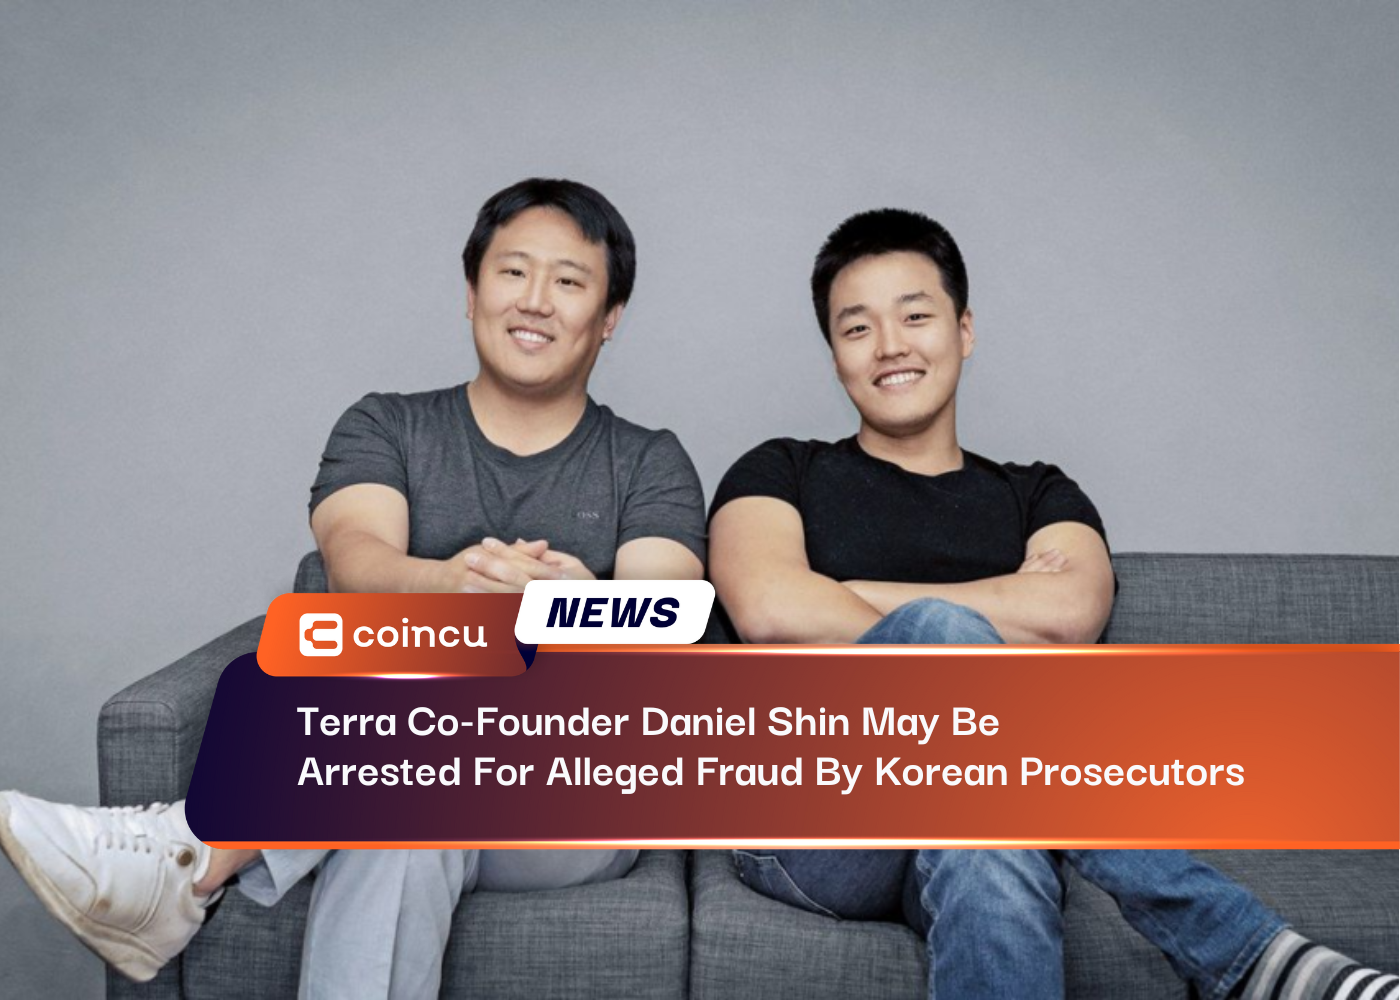 Terra Co-Founder Daniel Shin May Be Arrested For Alleged Fraud By Korean Prosecutors